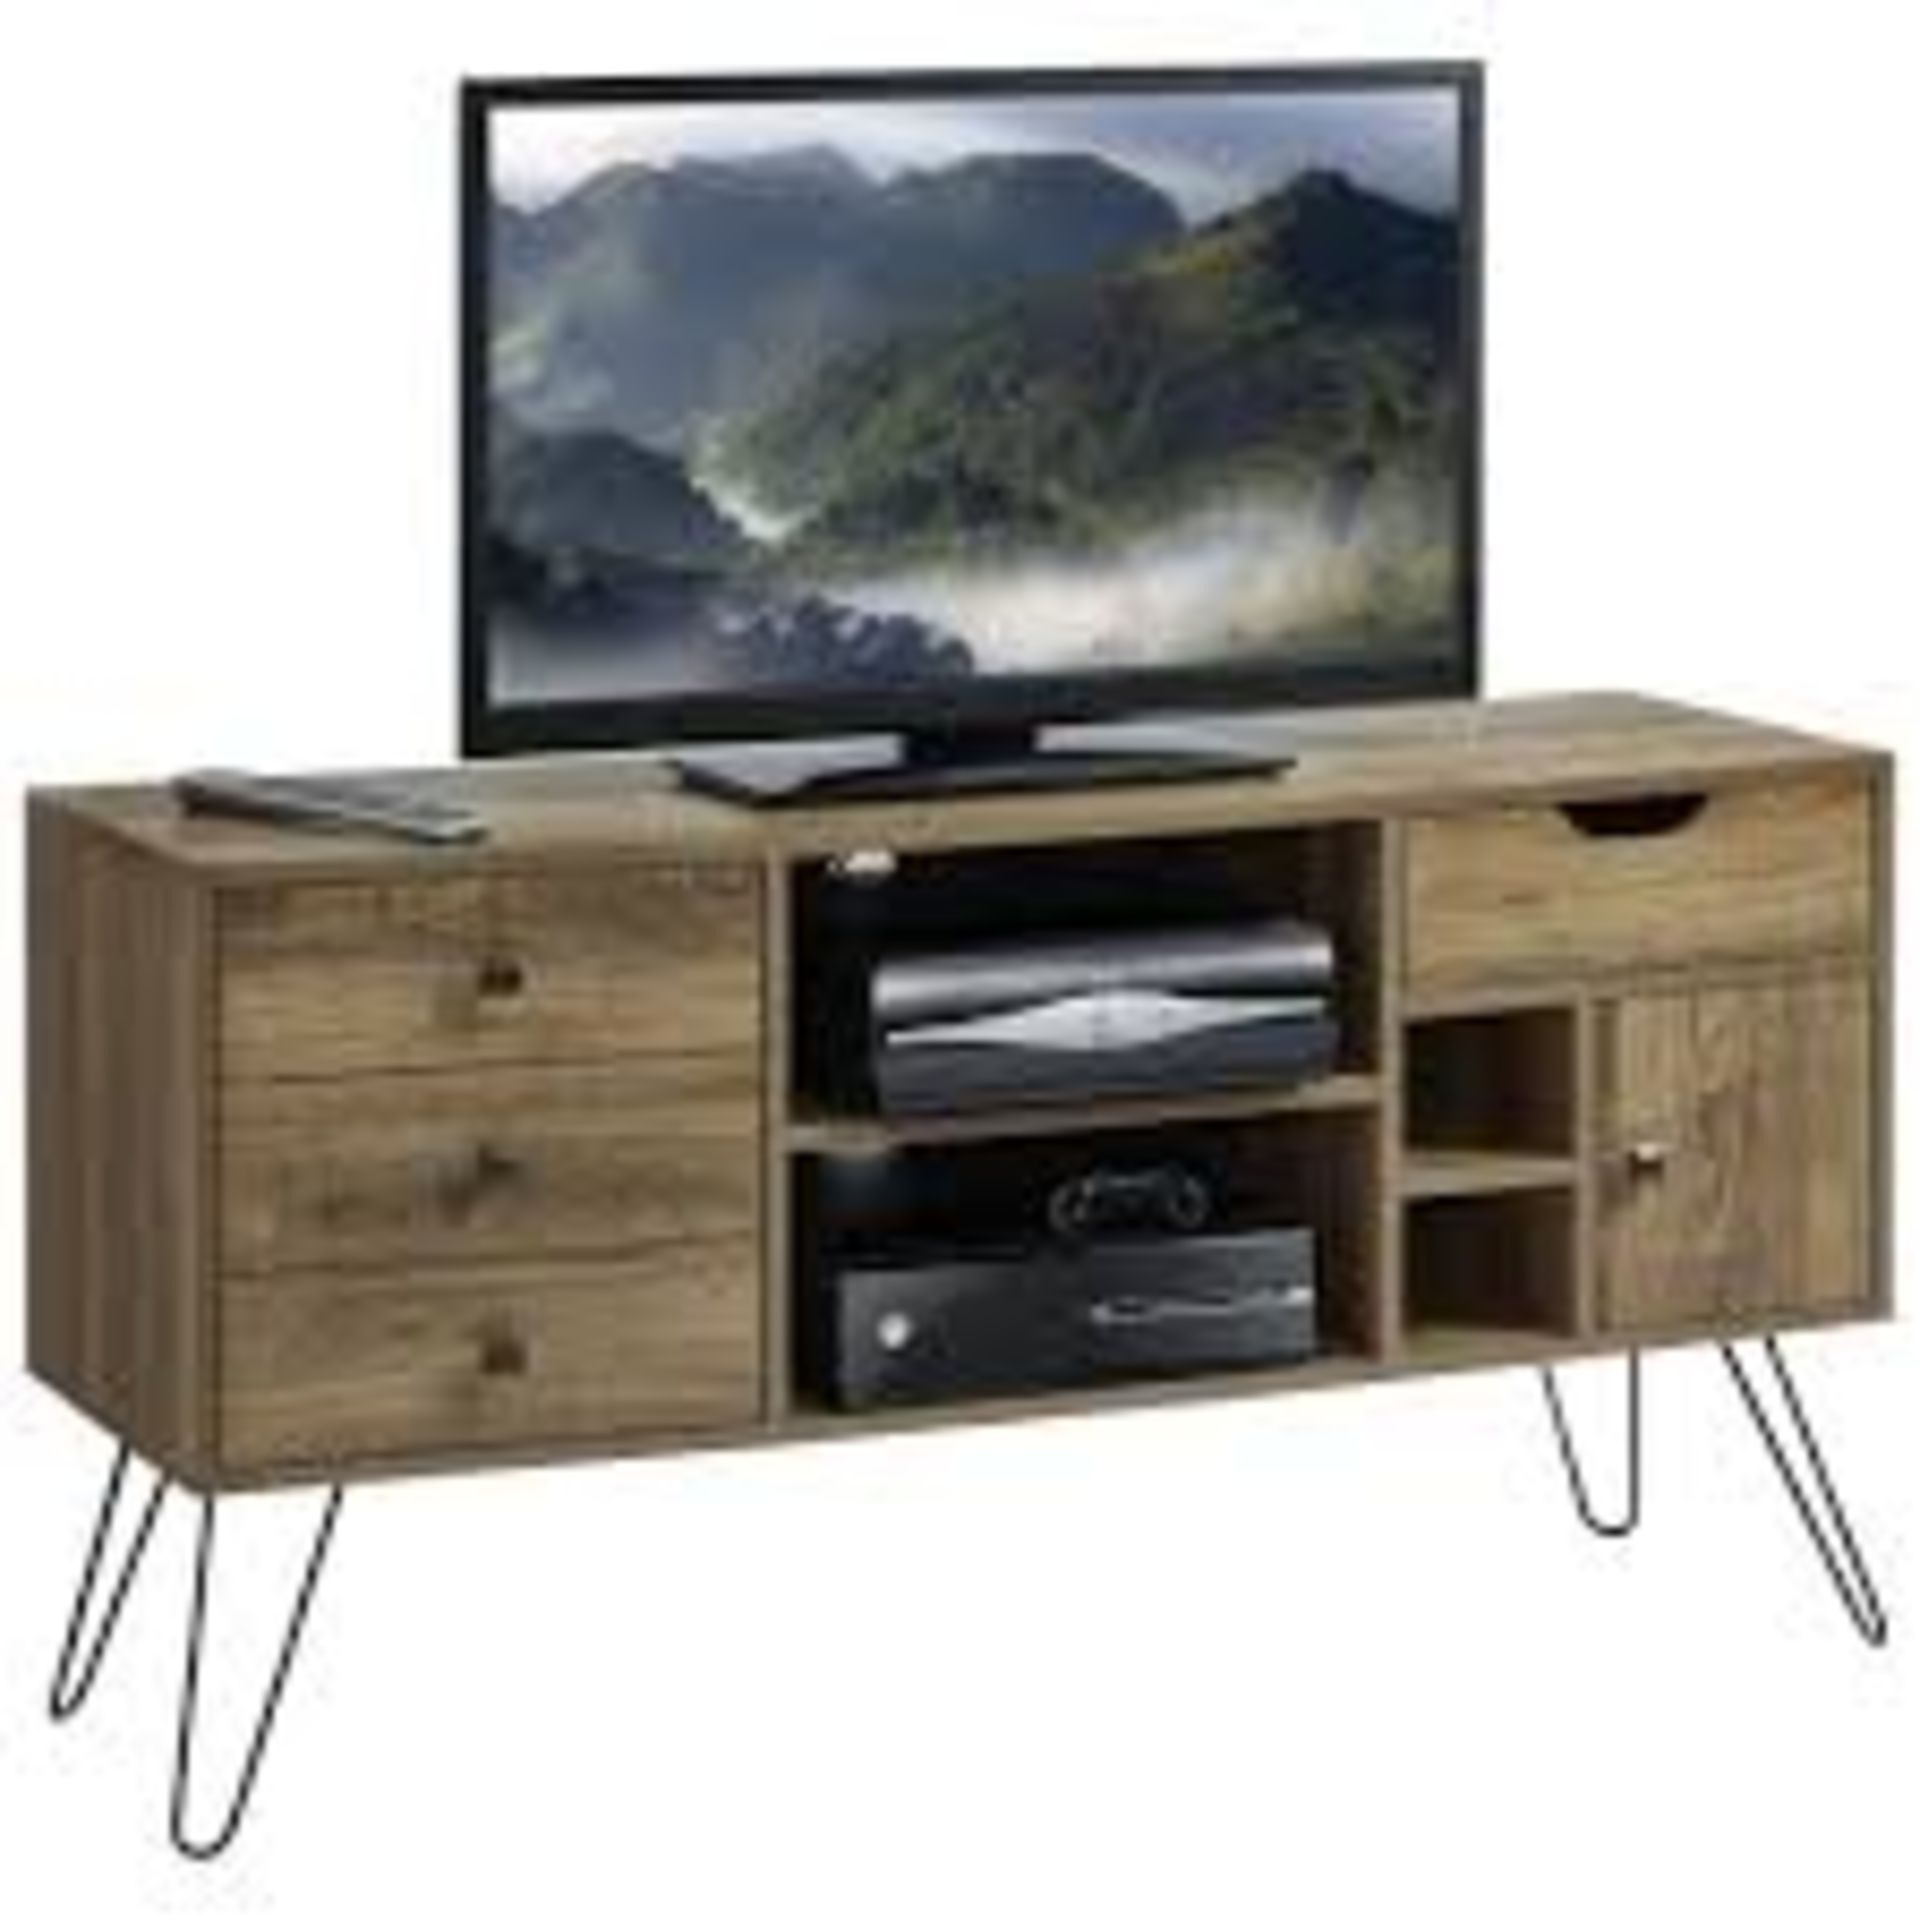 Boxed Williston Forge TV Stand Media Unit With Hairpin Legs RRP £160 (1627) (Pictures Are For